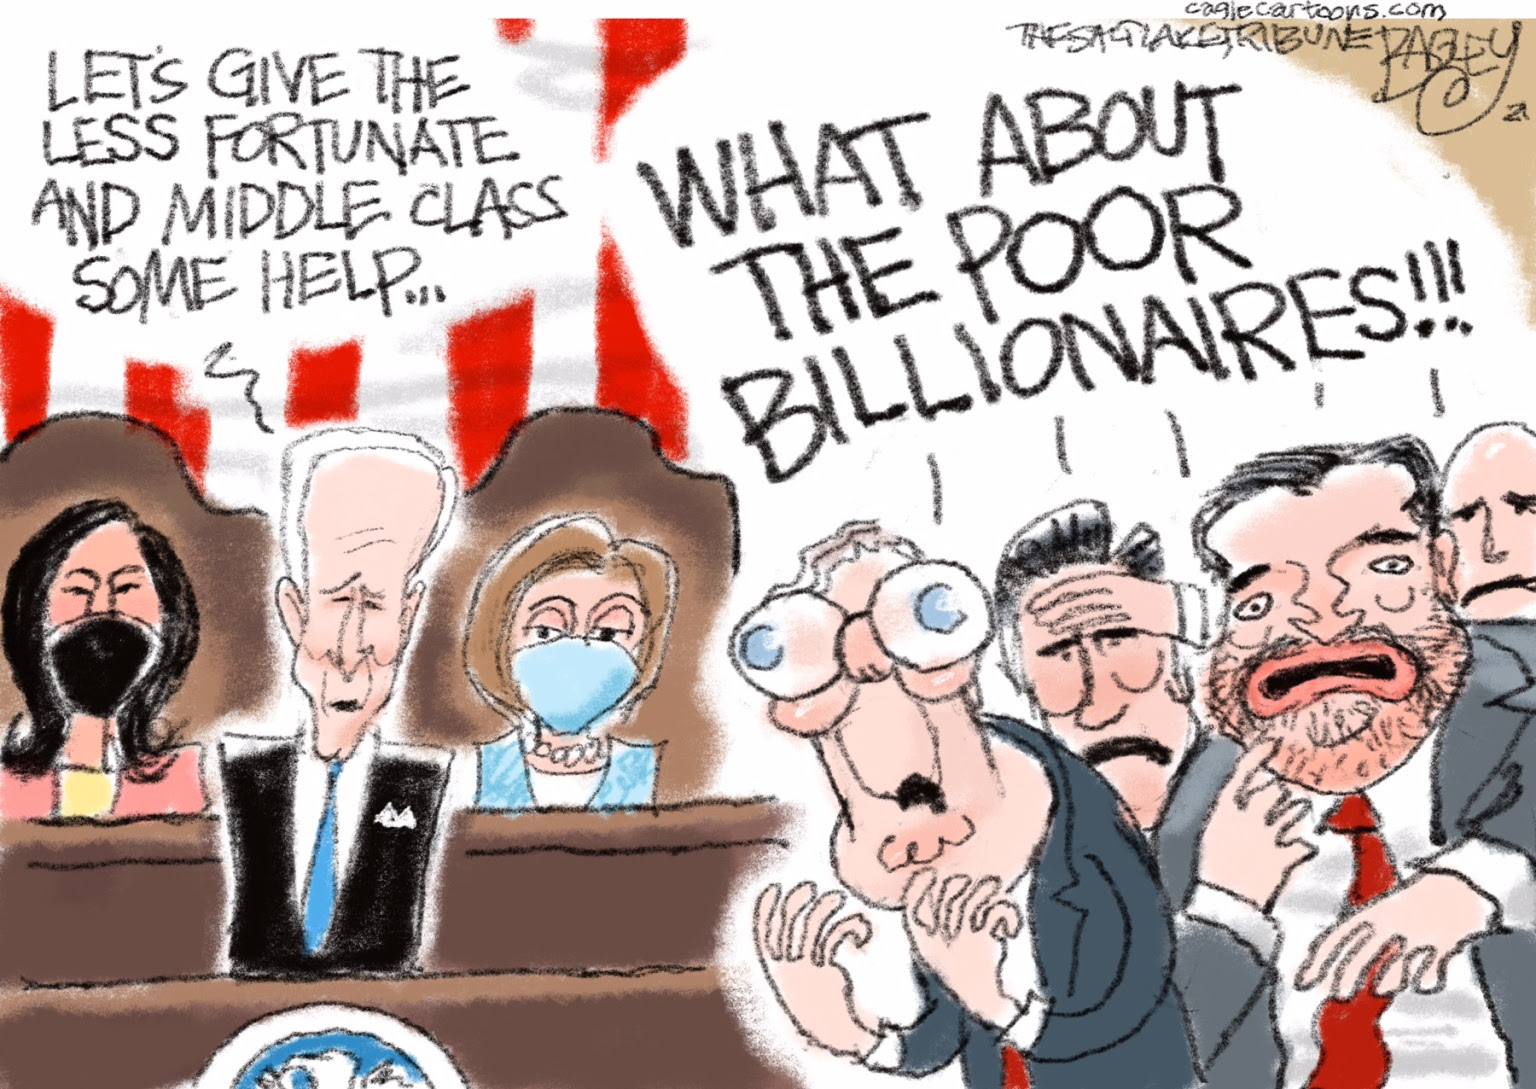 Rick Scott McConnell Cruz and GOP give tax cuts to the billionaires and plan to tax the poor